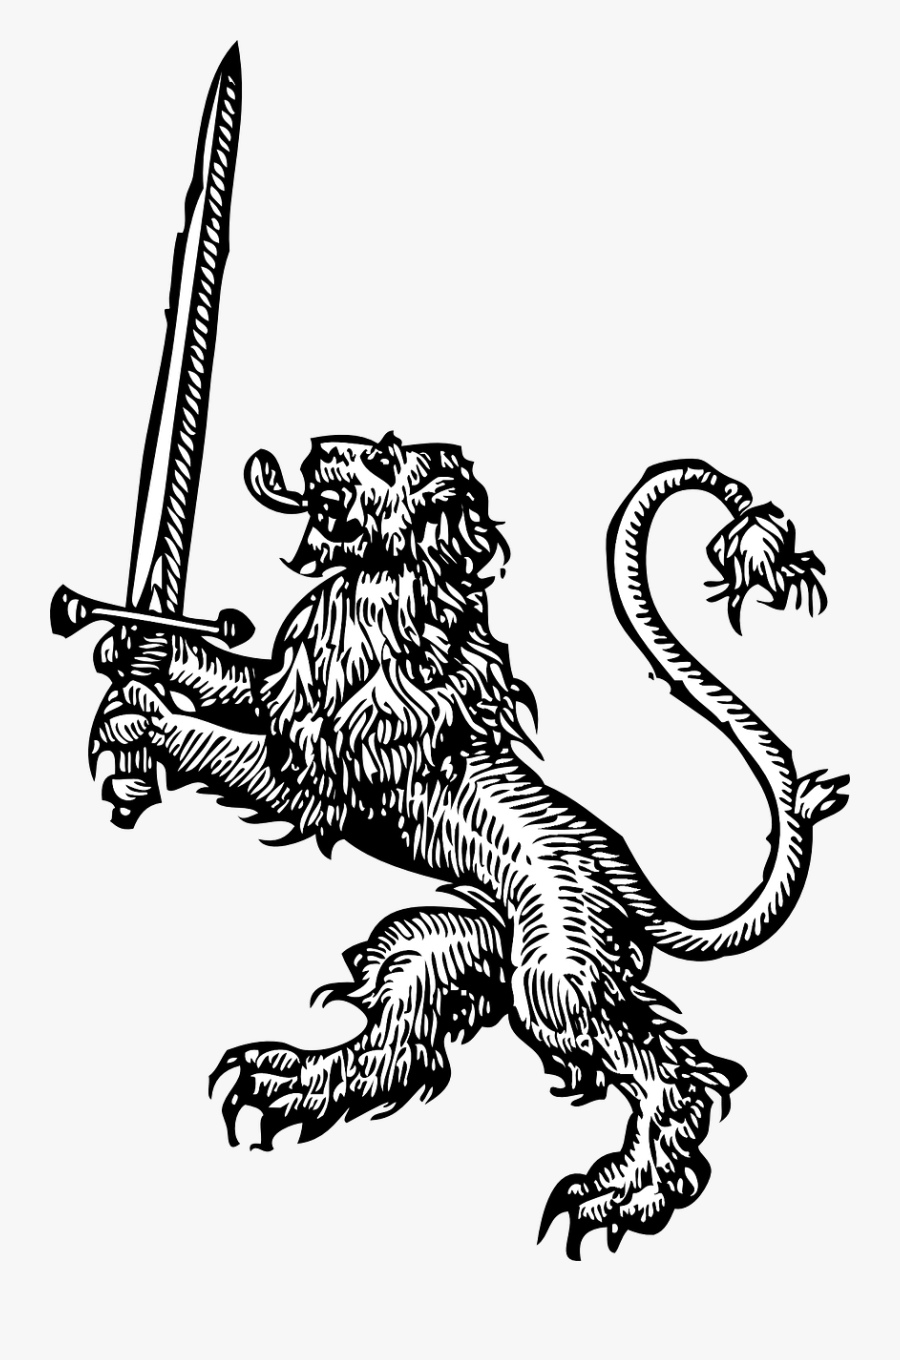 Lion With Sword - Lion With A Sword, Transparent Clipart